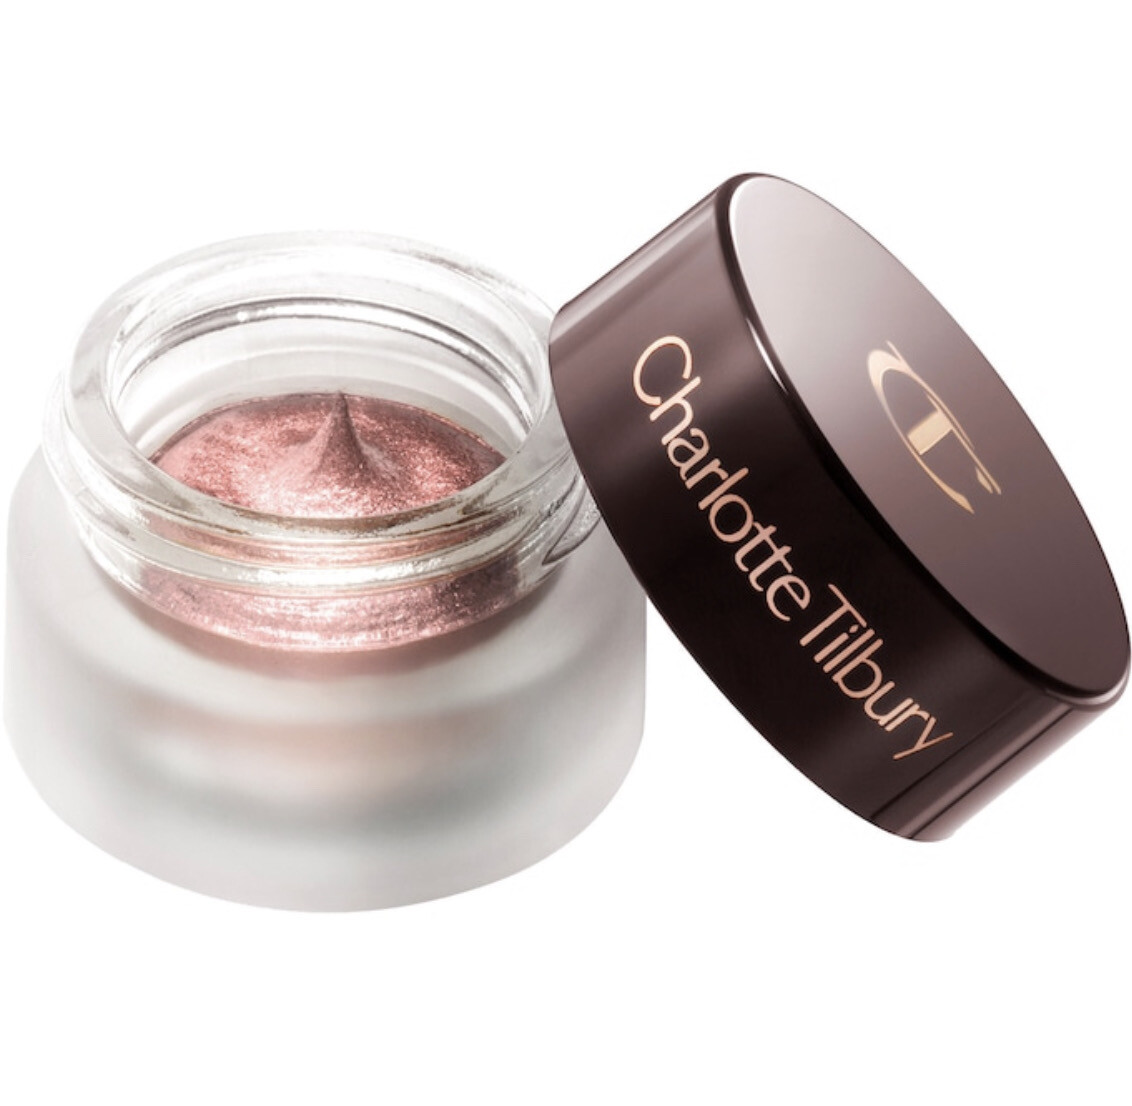 Charlotte Tilbury - Eyes To Mesmerize Cream Eyeshadow | Pillow Talk - dusty-pink with rose-gold sparkle